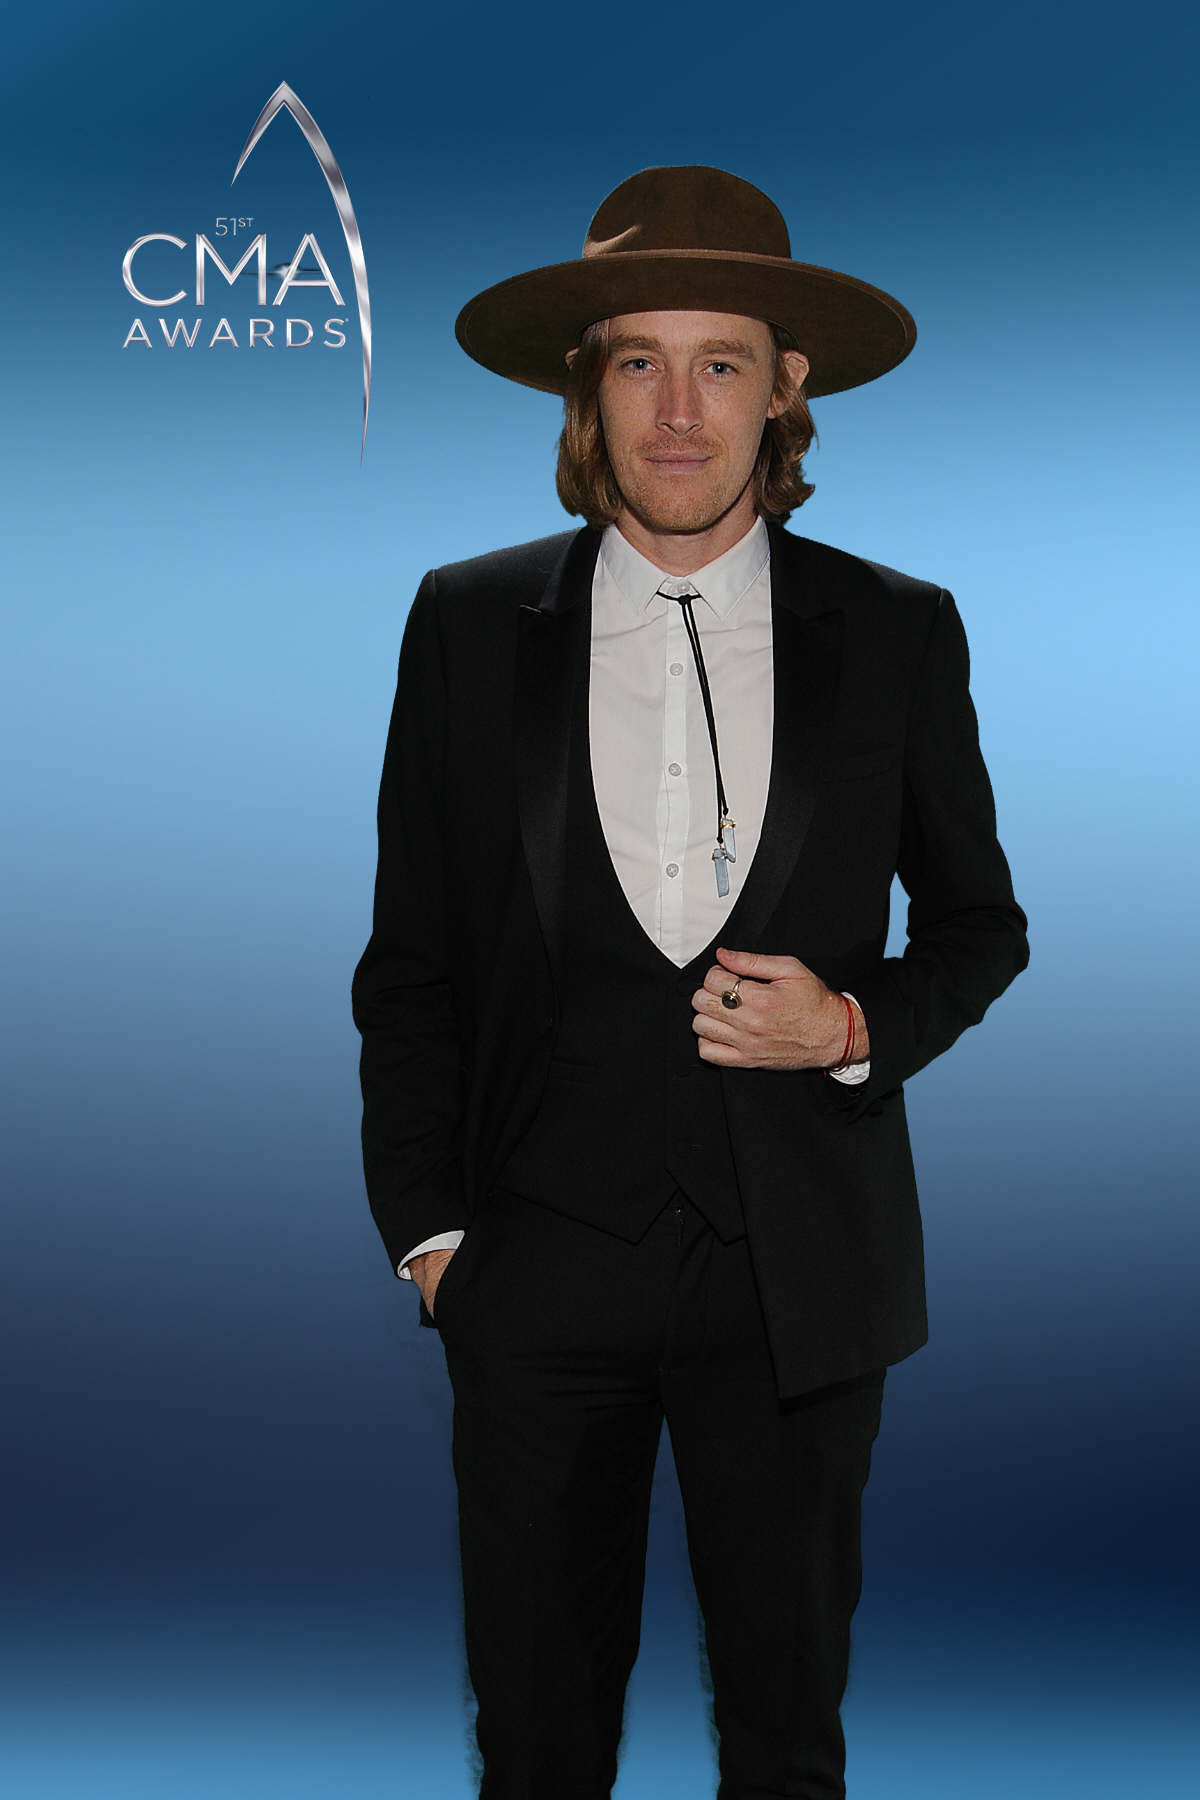 51st CMA Awards After Party